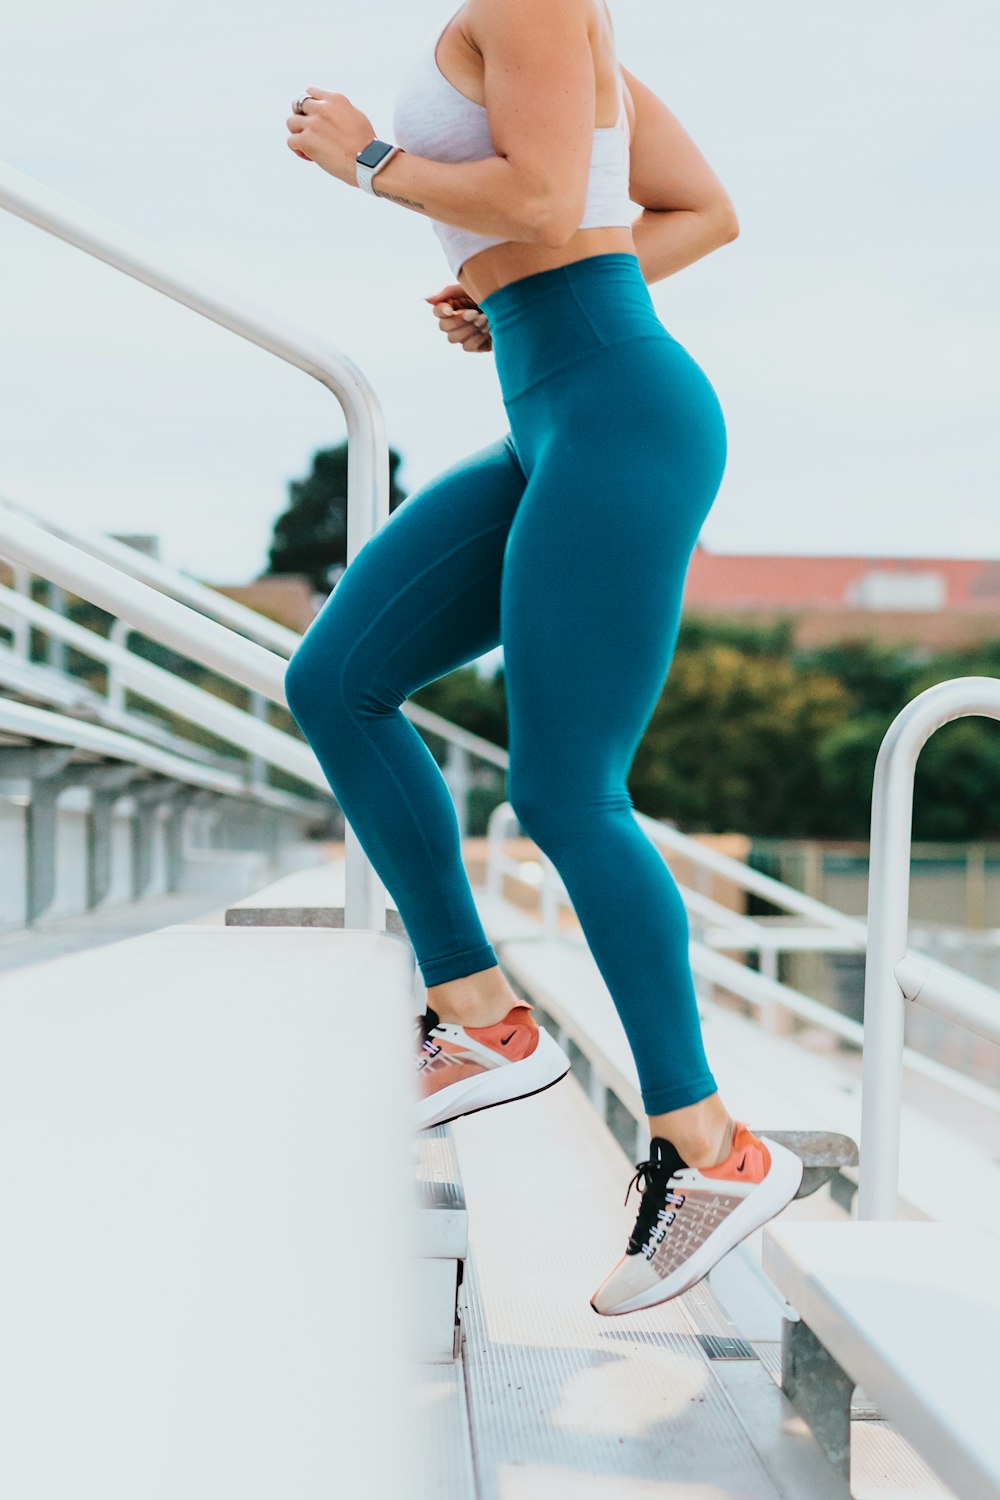 Yoga Clothes Pictures  Download Free Images on Unsplash